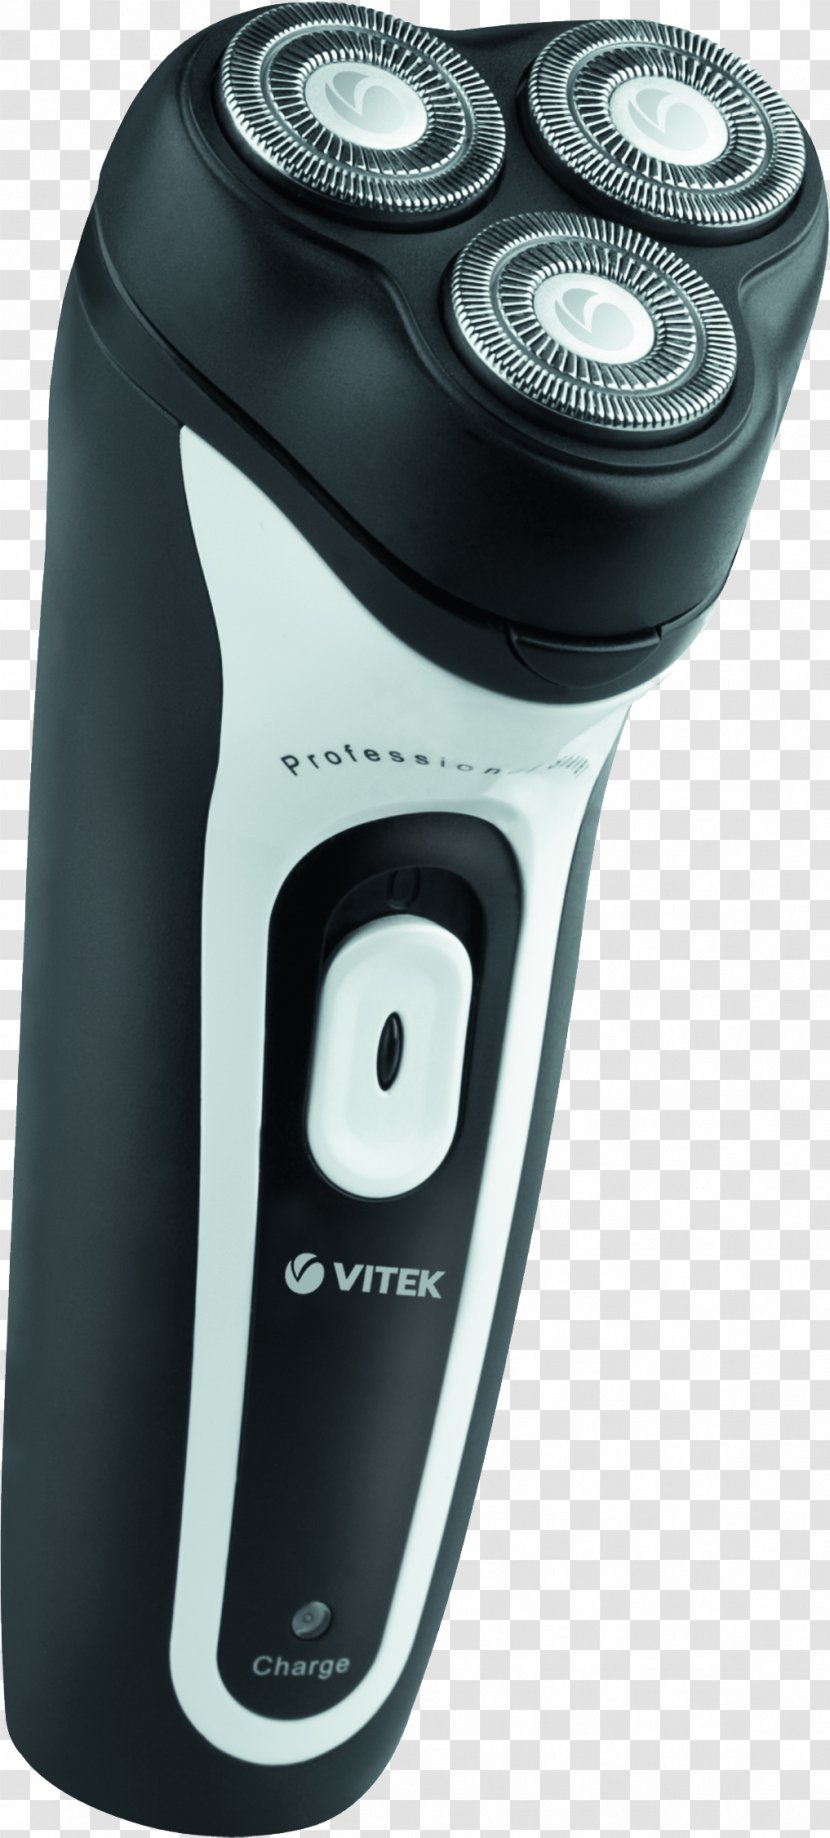 Battery Charger Electric Razor Shaving - Price Transparent PNG